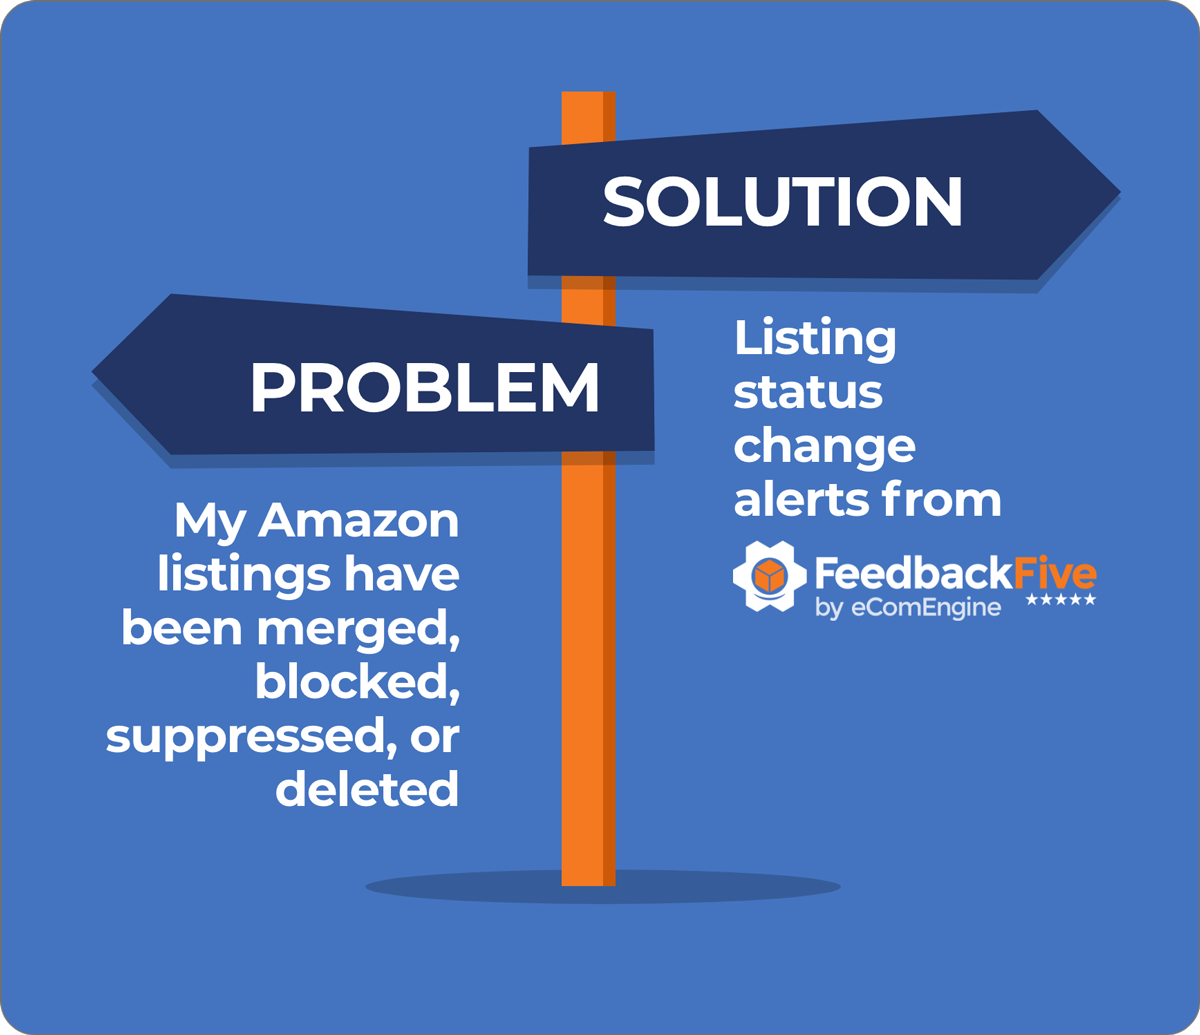 Two-way sign illustration with a problem and a solution for merged, blocked, suppressed or deleted Amazon listings